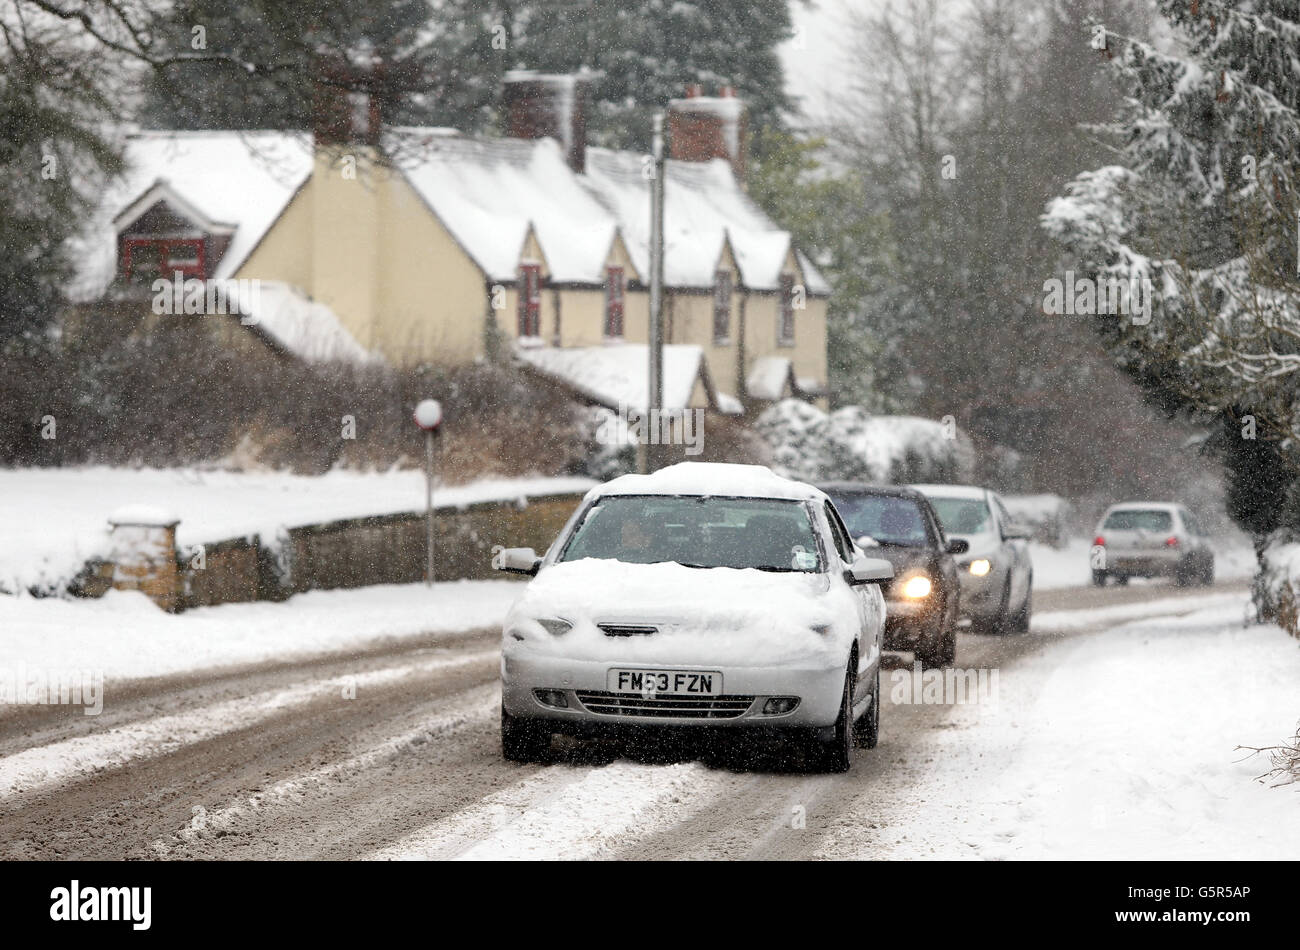 s transport network began to buckle today as heavy snow swept the UK. Stock Photo